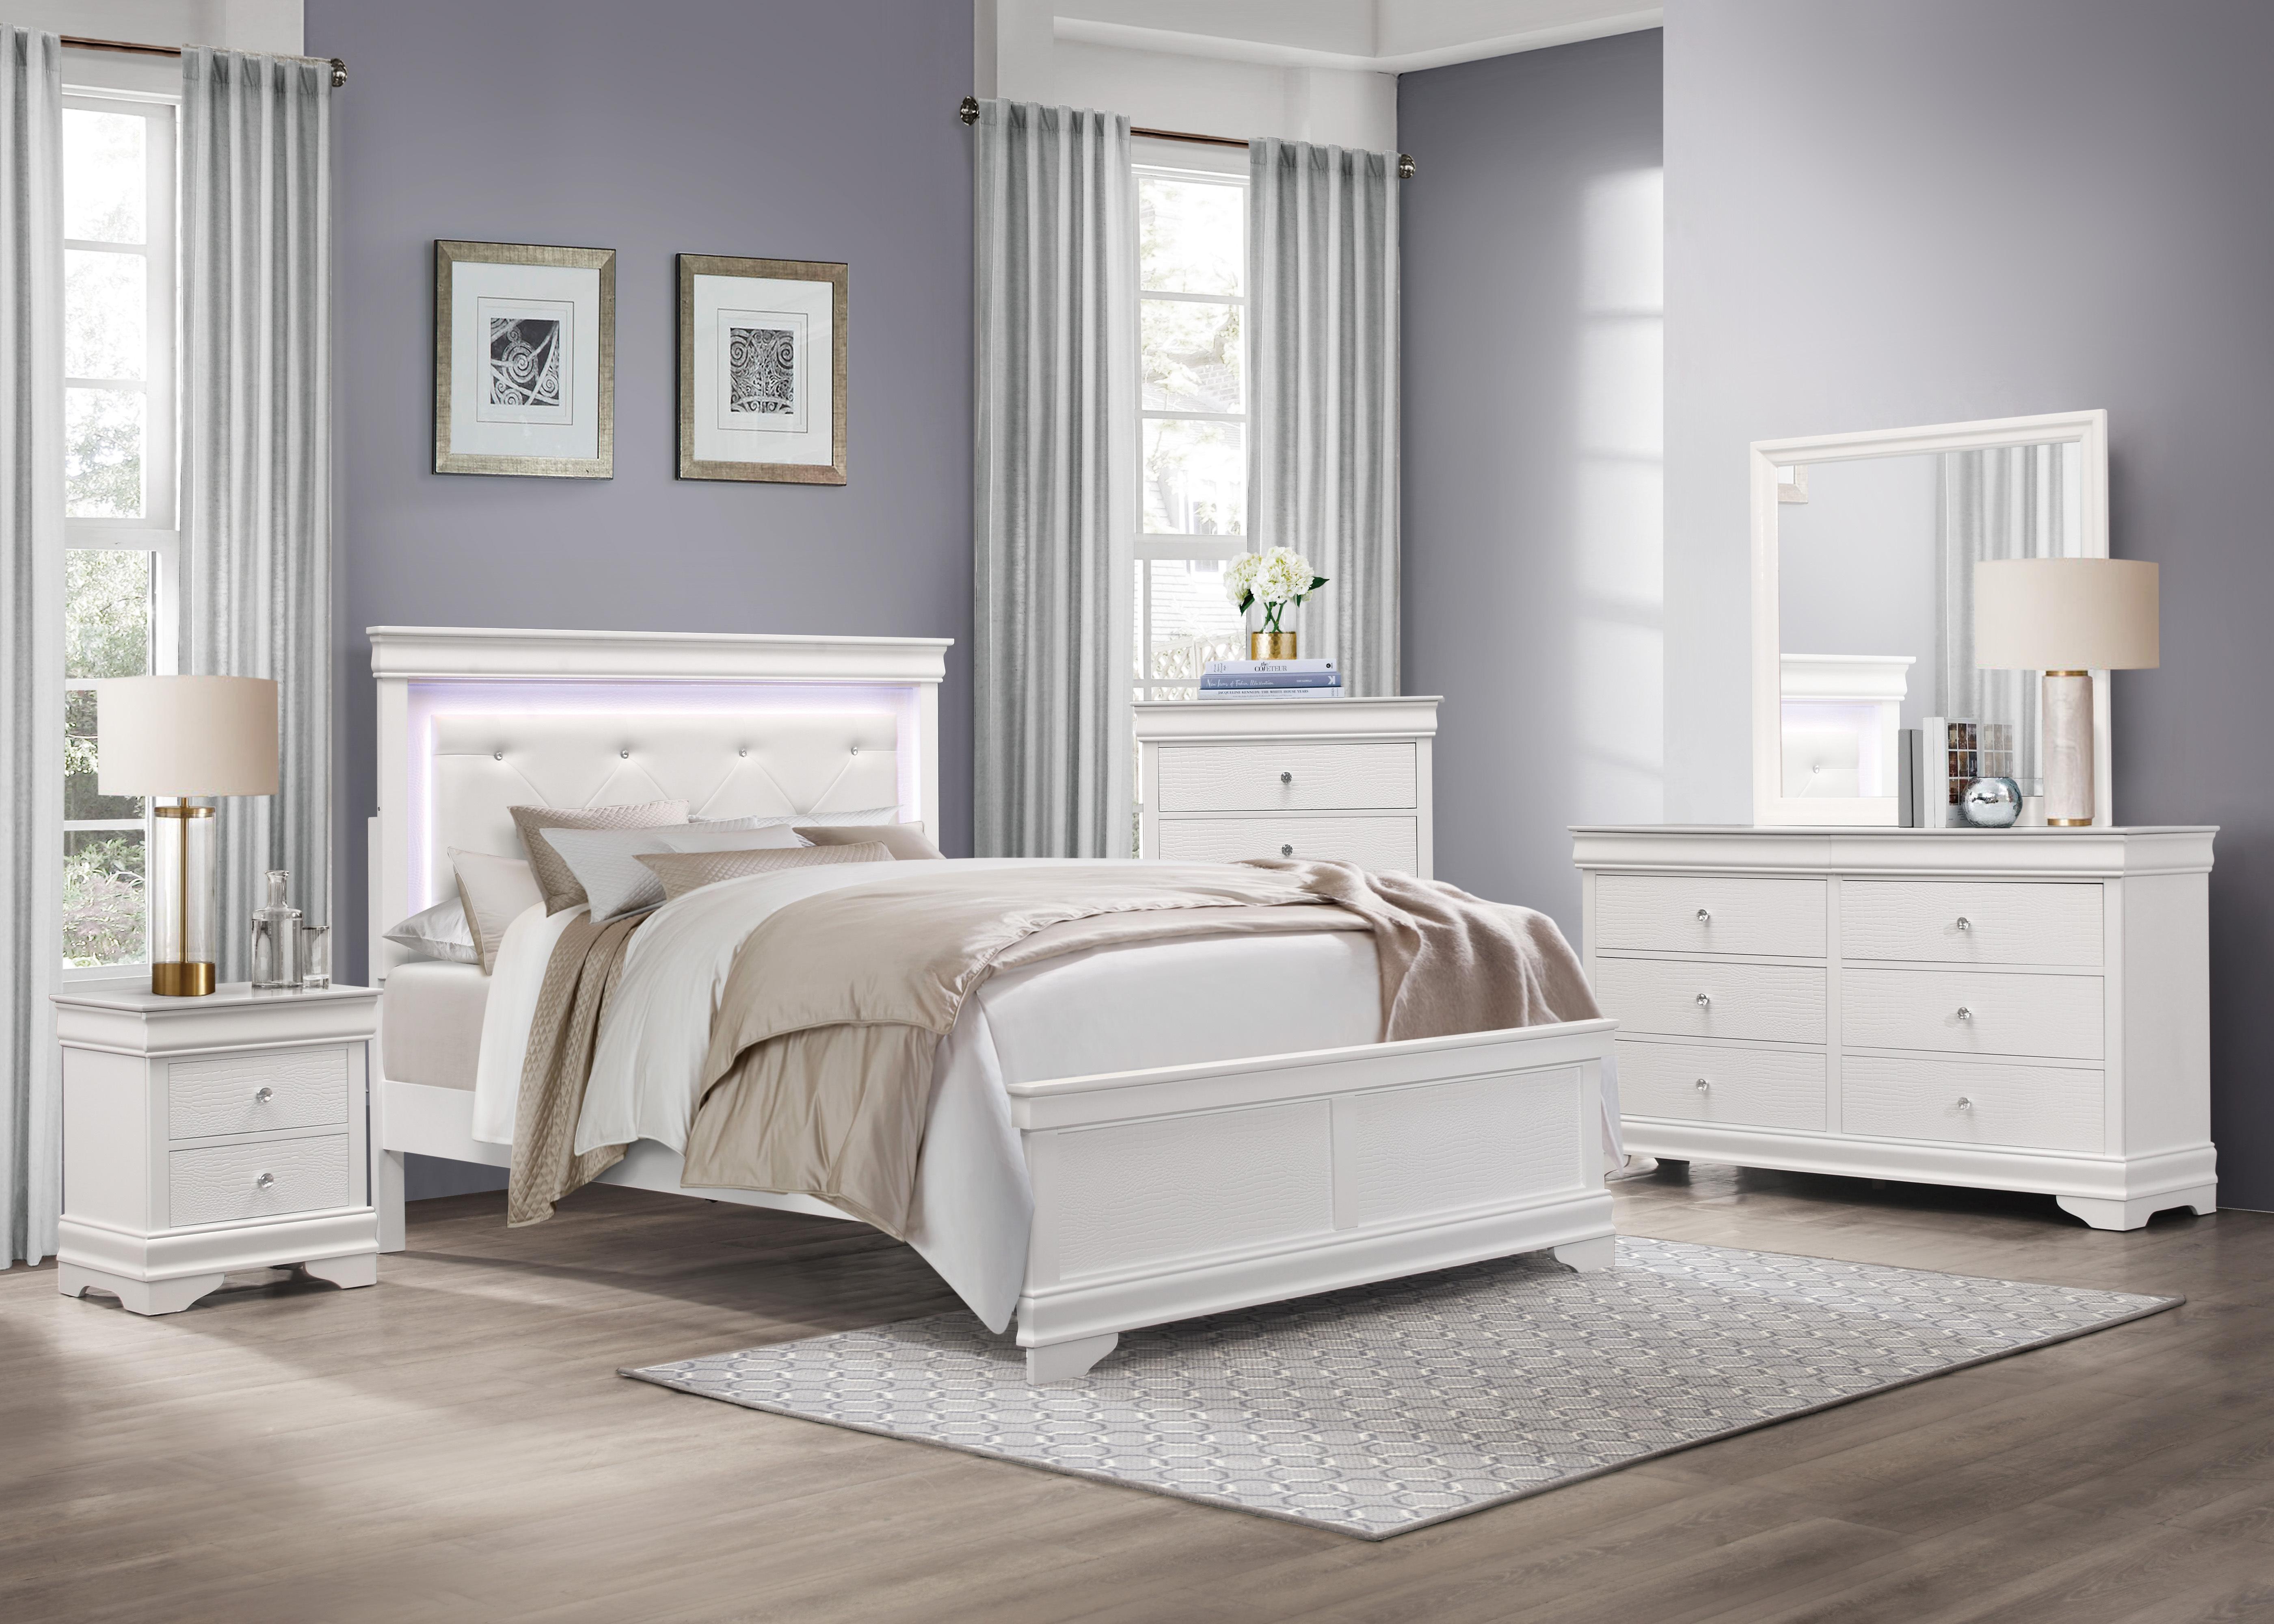 Traditional Bedroom Set 1556WF-1-5PC Lana 1556WF-1-5PC in White Faux Leather